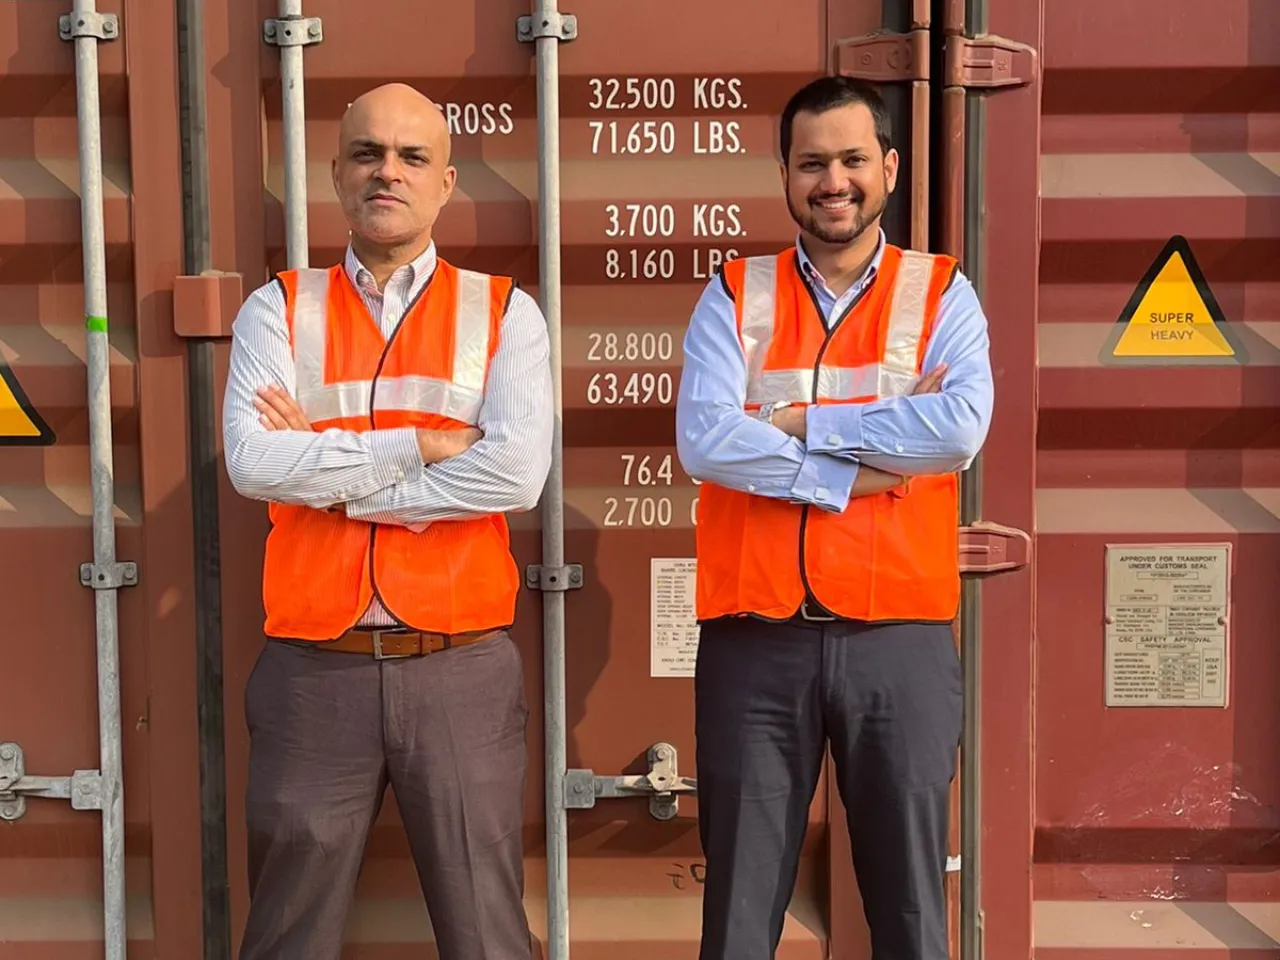 MatchLog Solutions raises $1.5M to enhance sustainability and carbon efficiency in container logistics